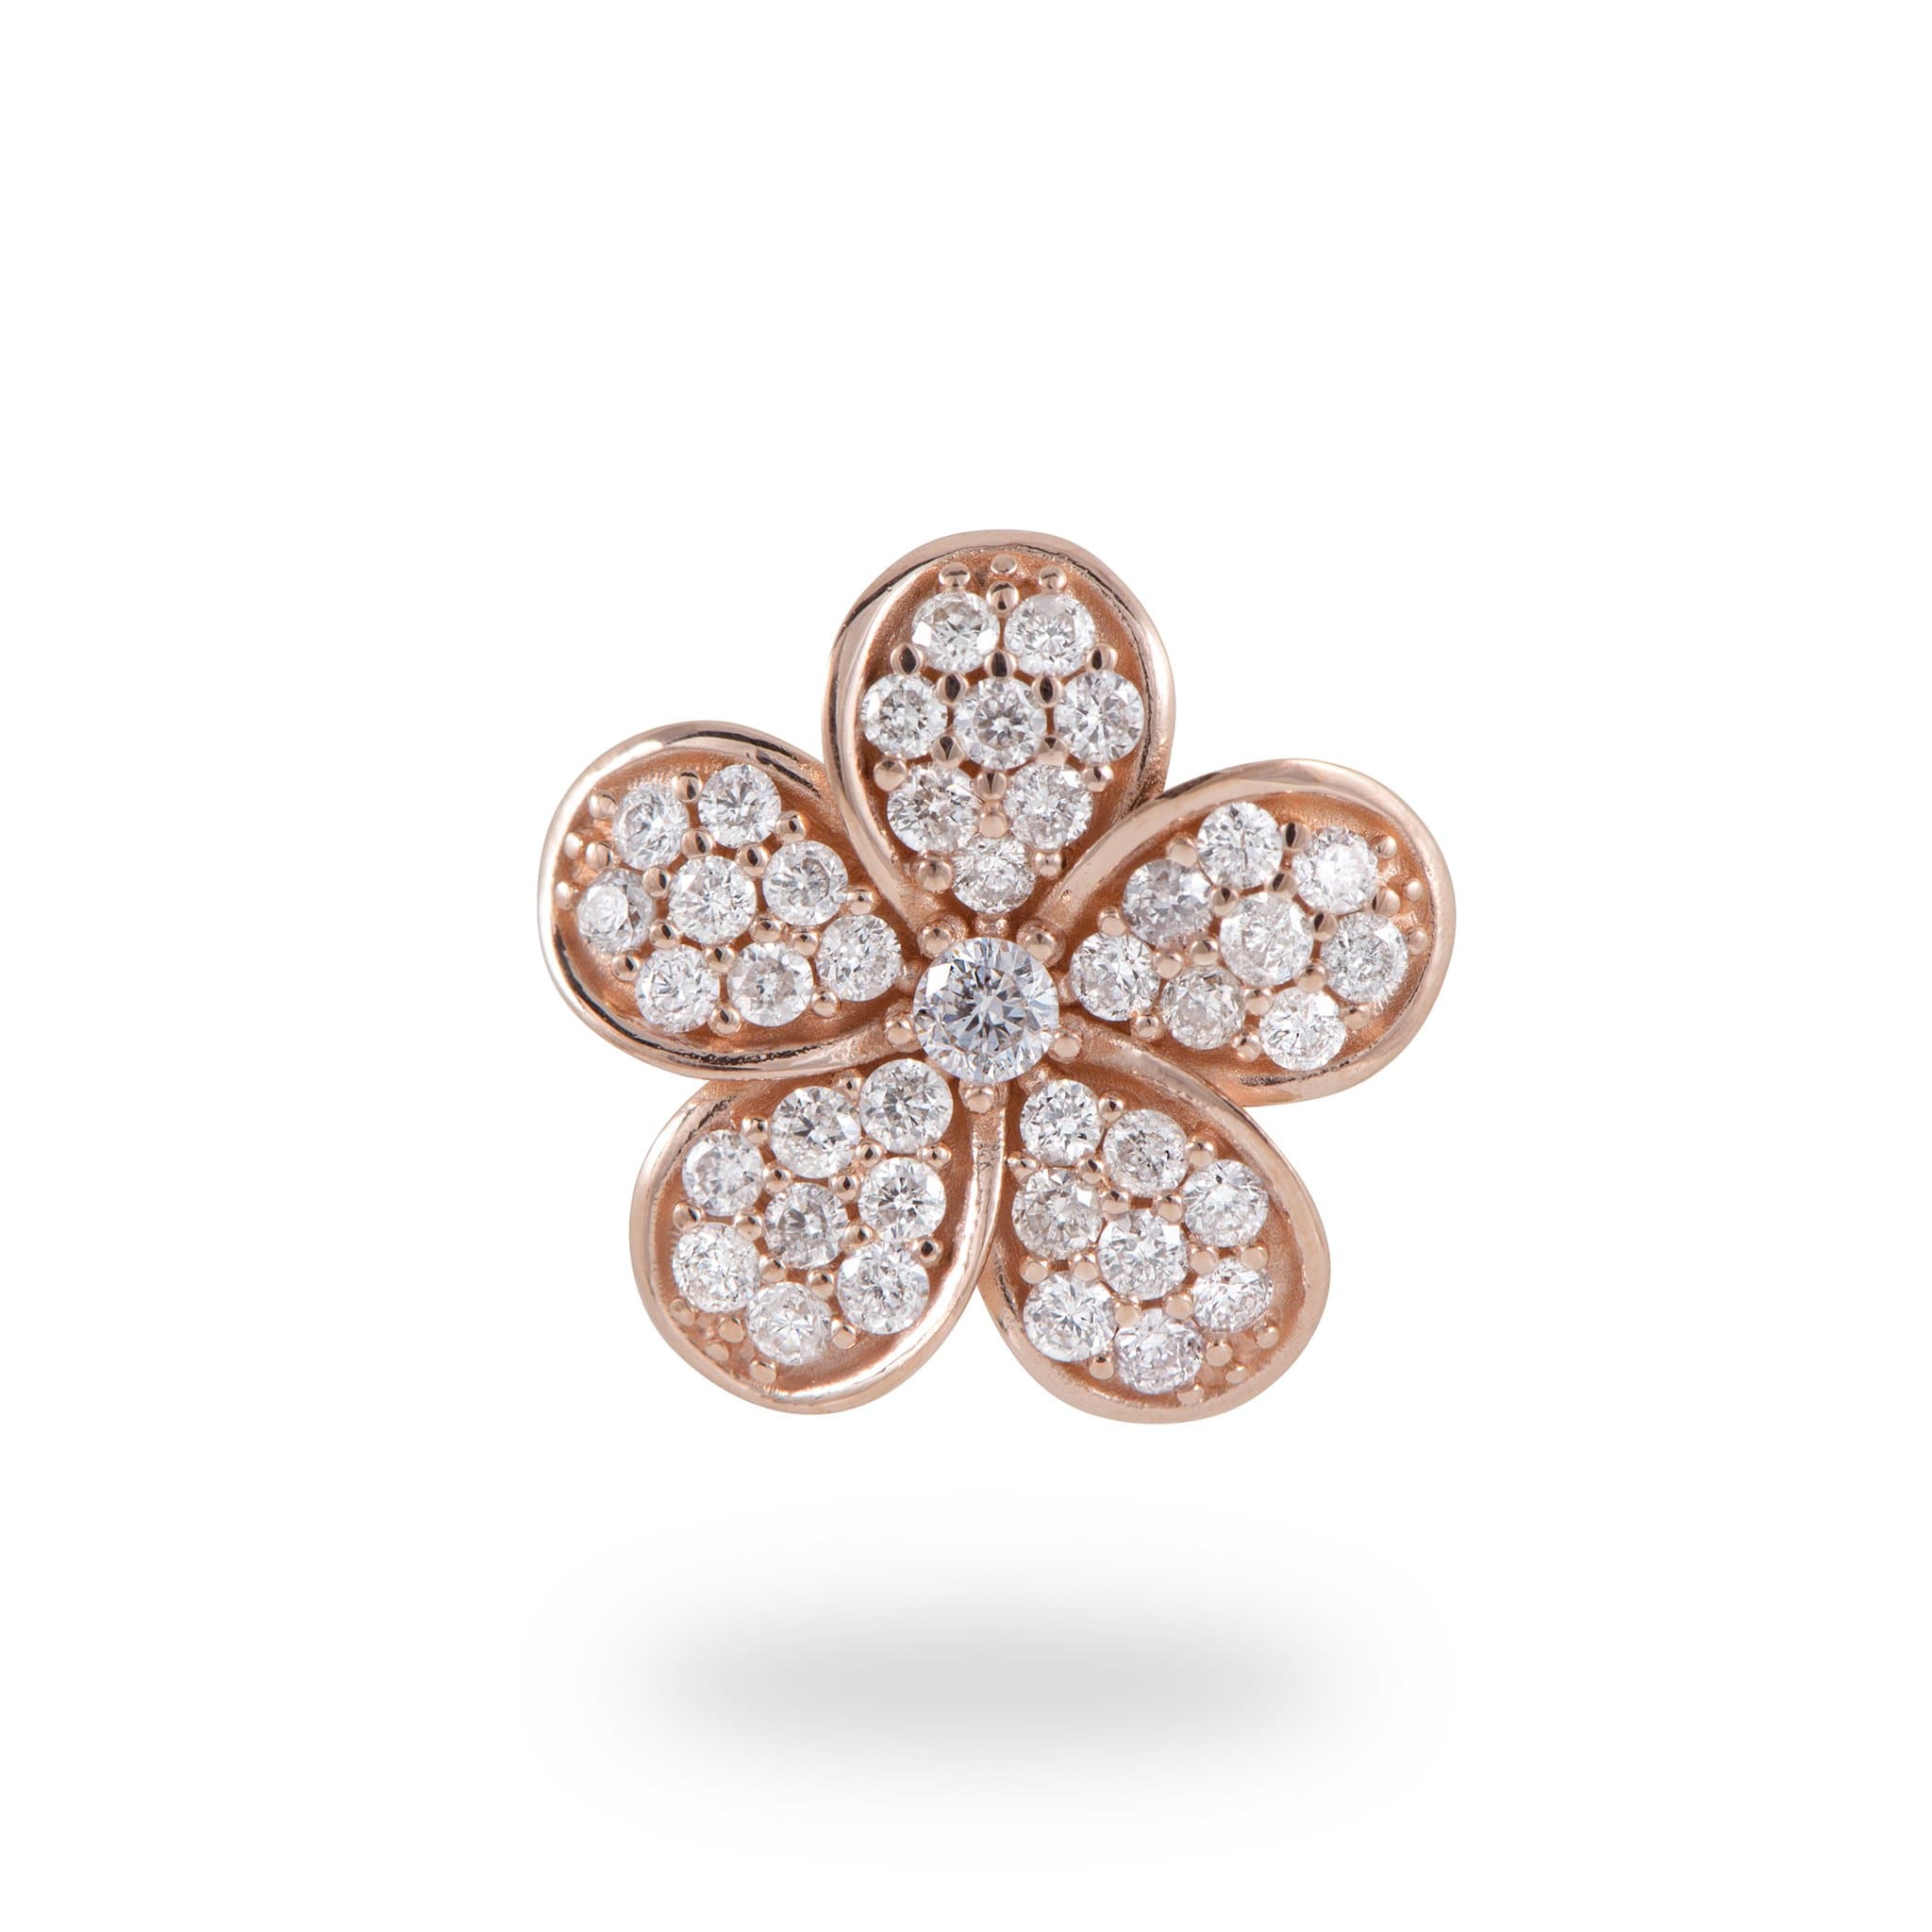 Plumeria Earrings in Rose Gold with Diamonds - 13mm – Maui Divers